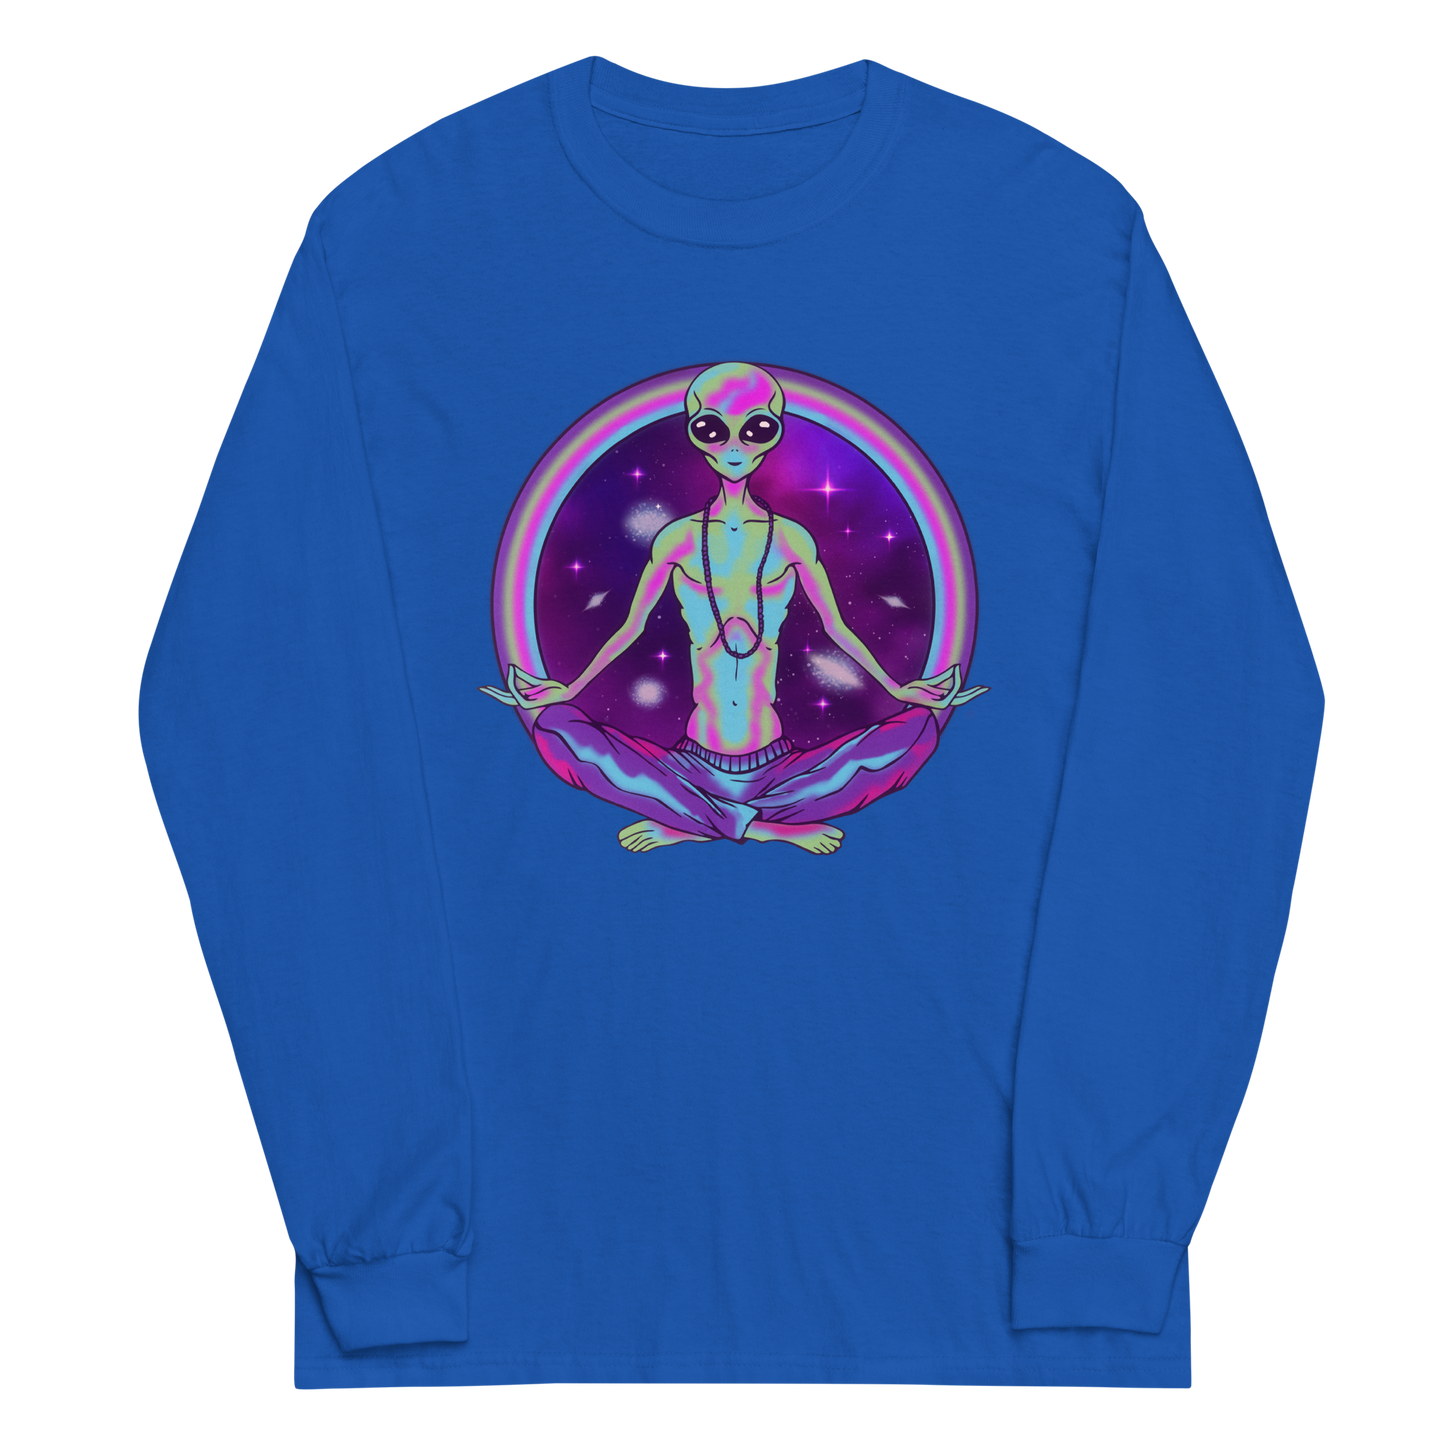 I'm At Peace Graphic Long Sleeve Tee